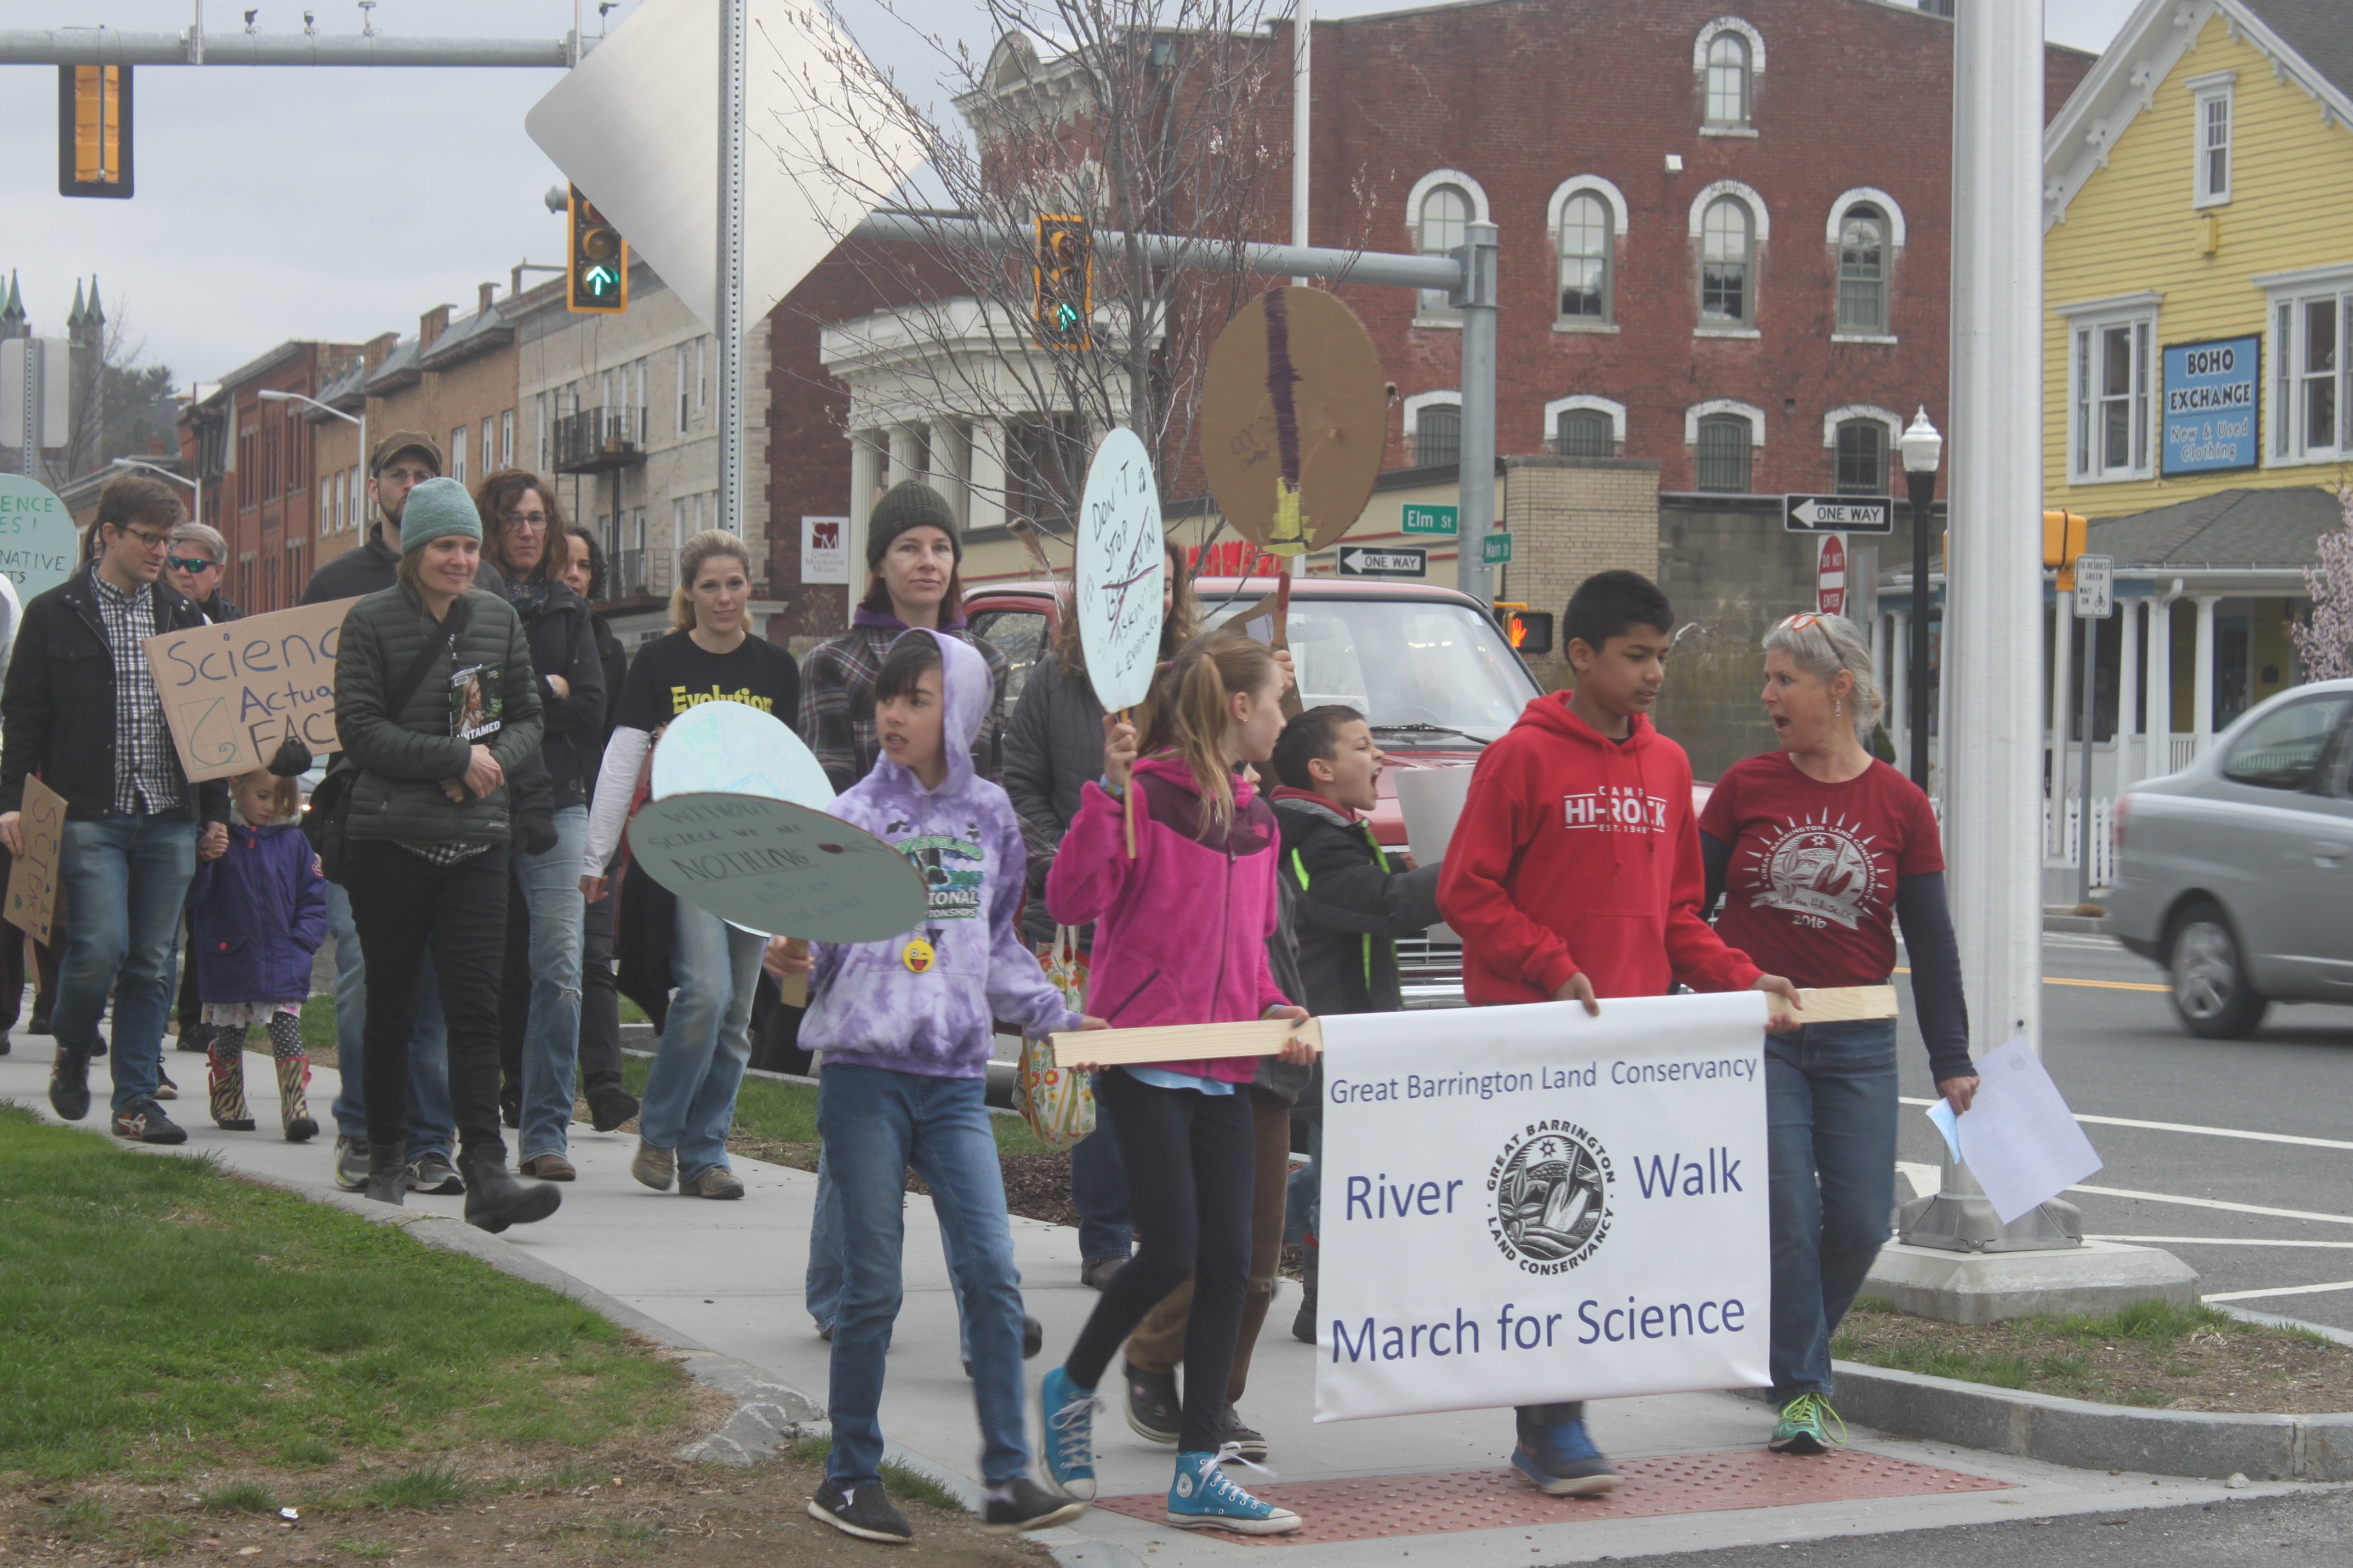 River Walk March for Science on Main Street Great Barrington, MA 